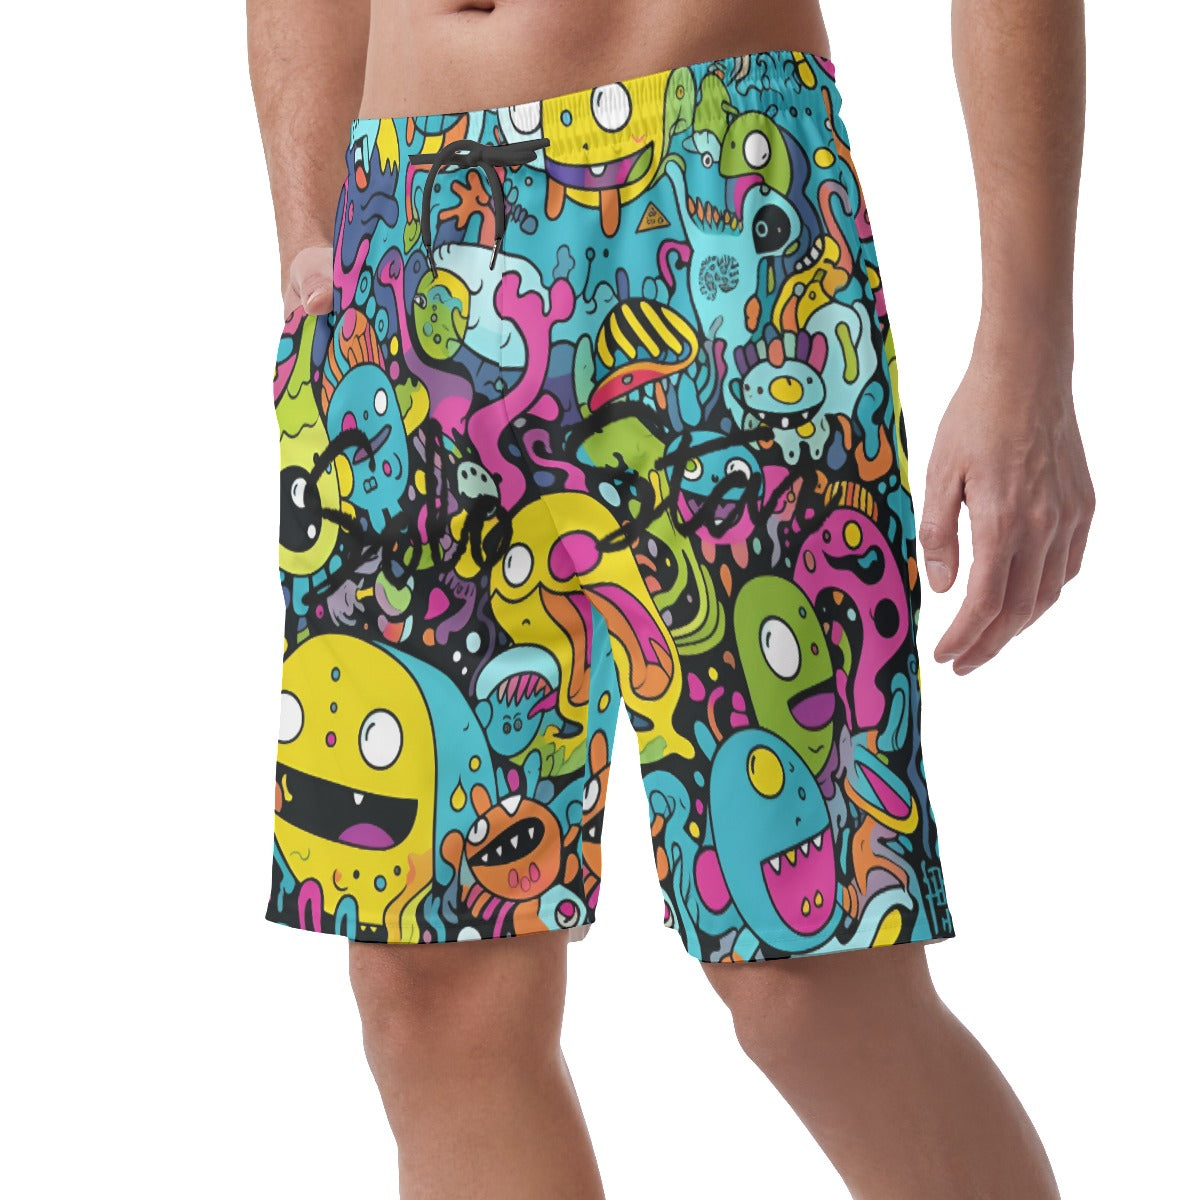 "S.T.A.R." Line 'Ugly Babies' Shorts